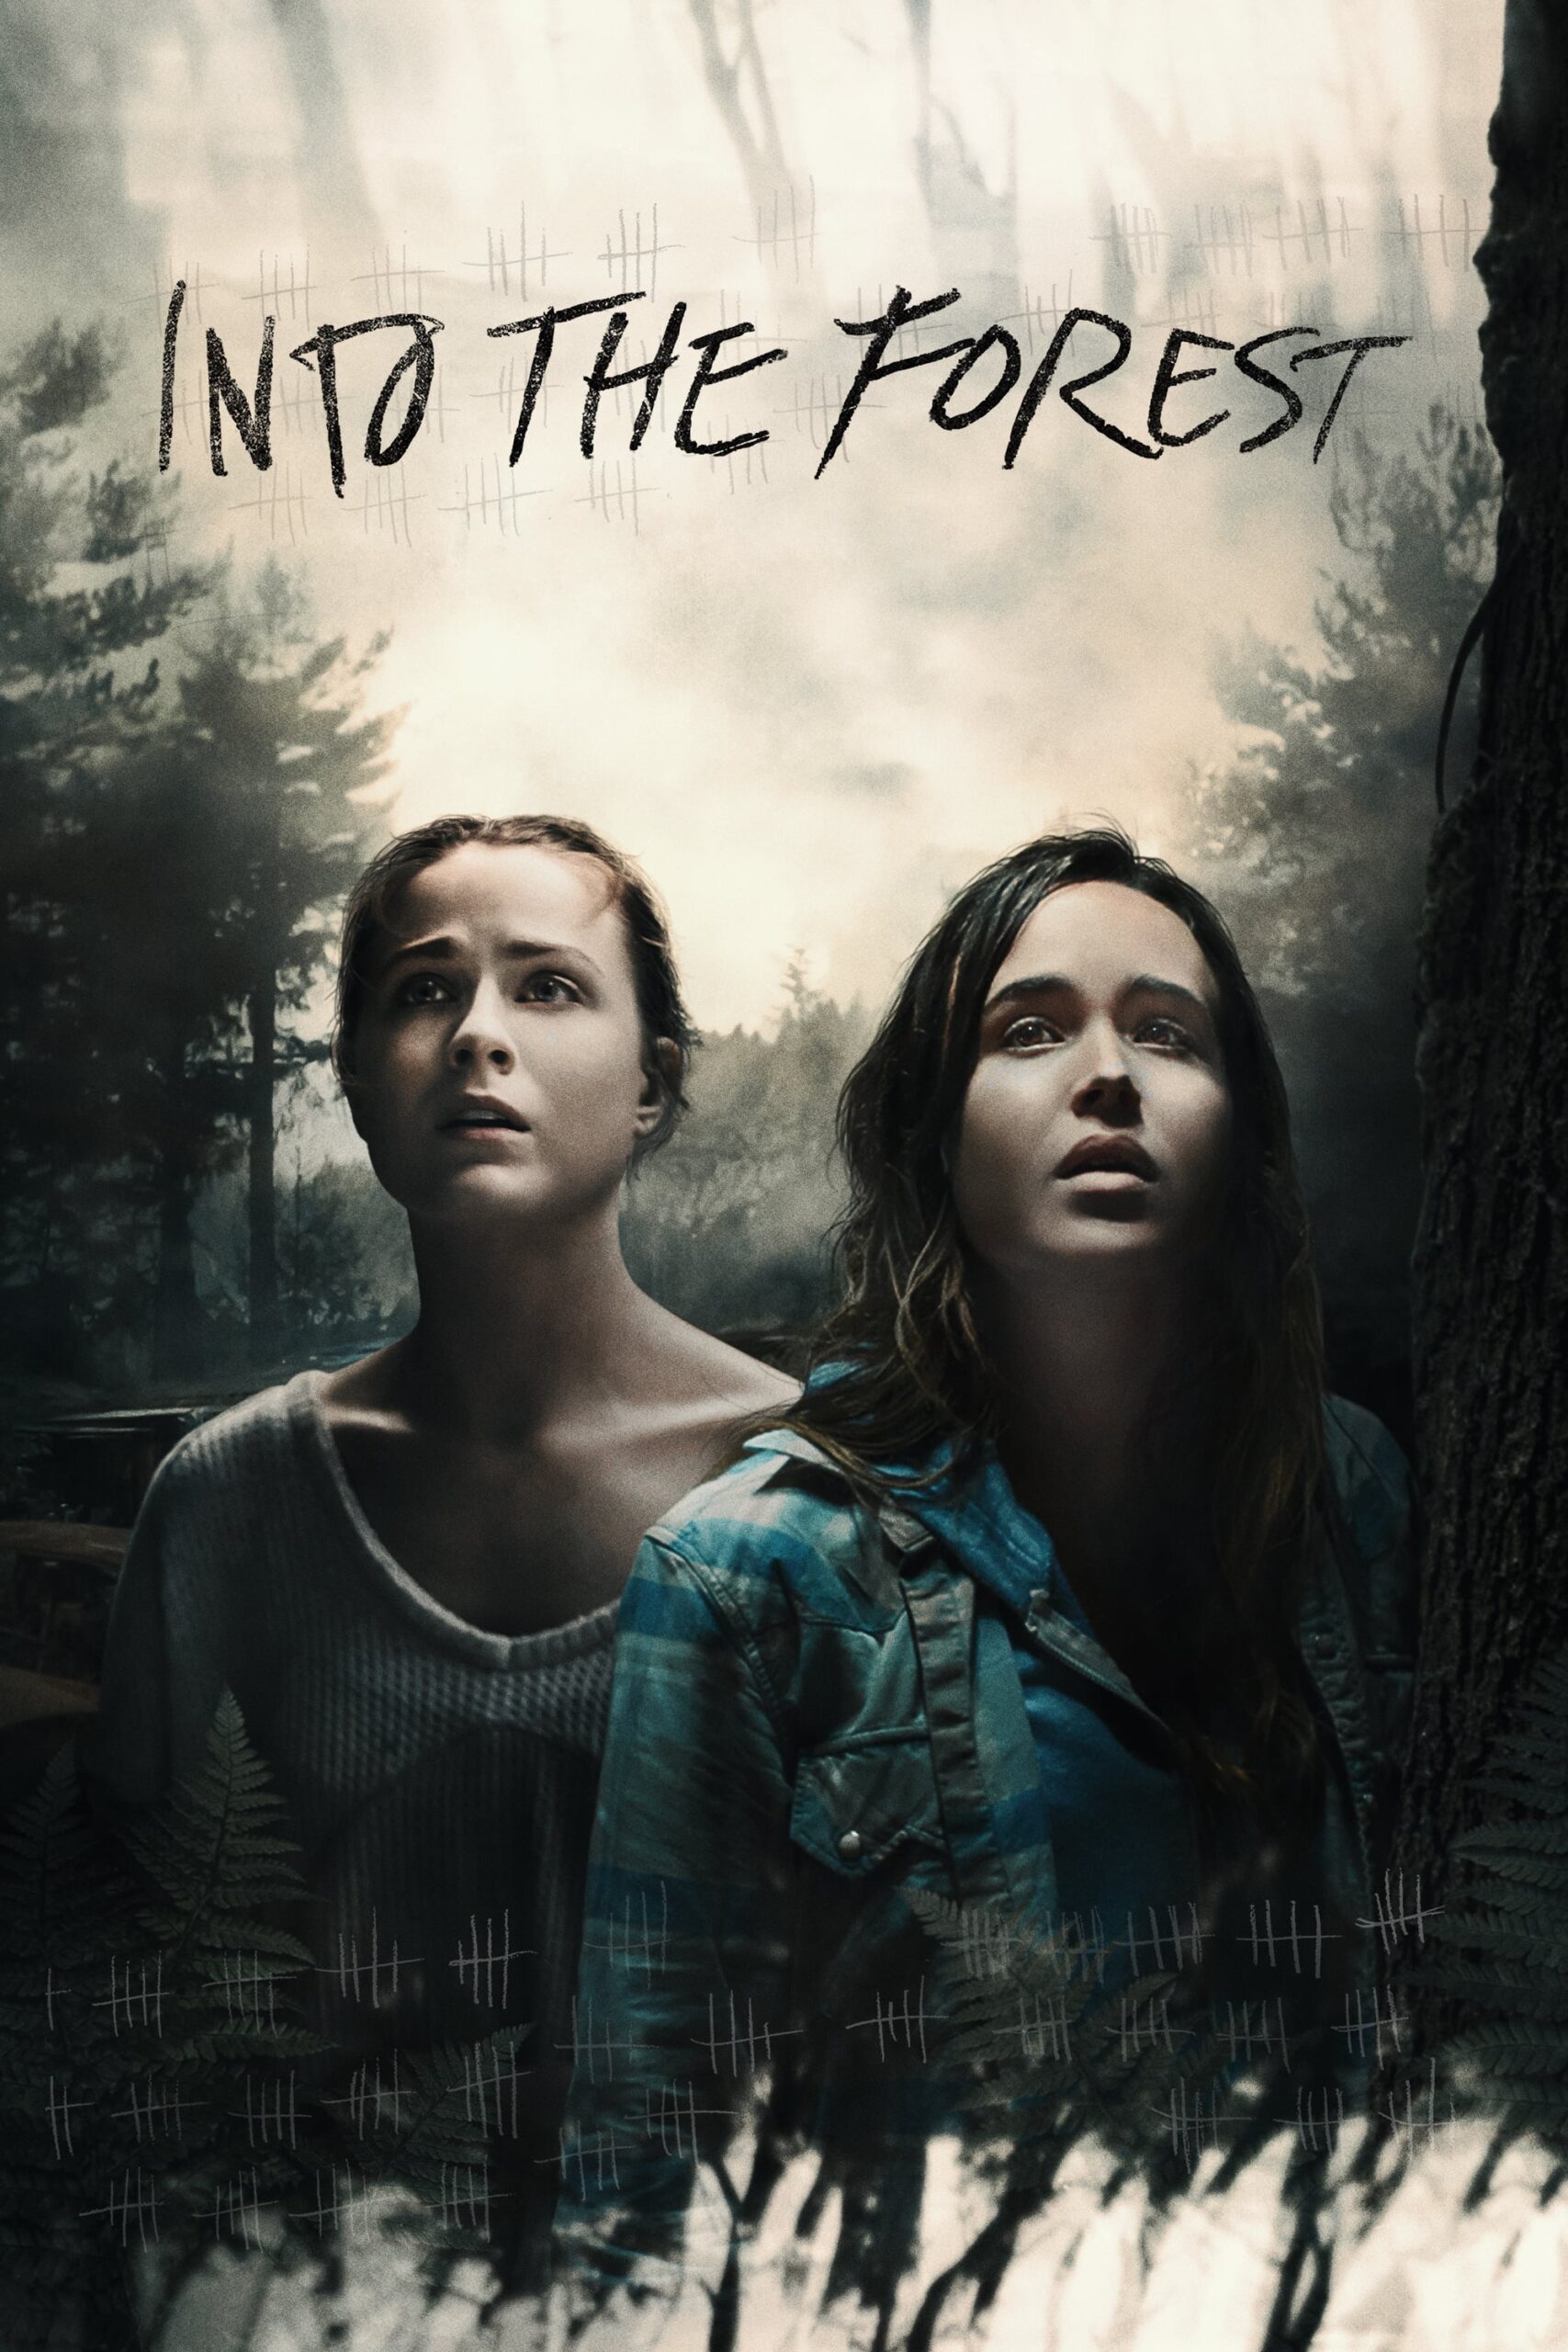 Poster for the movie "Into the Forest"